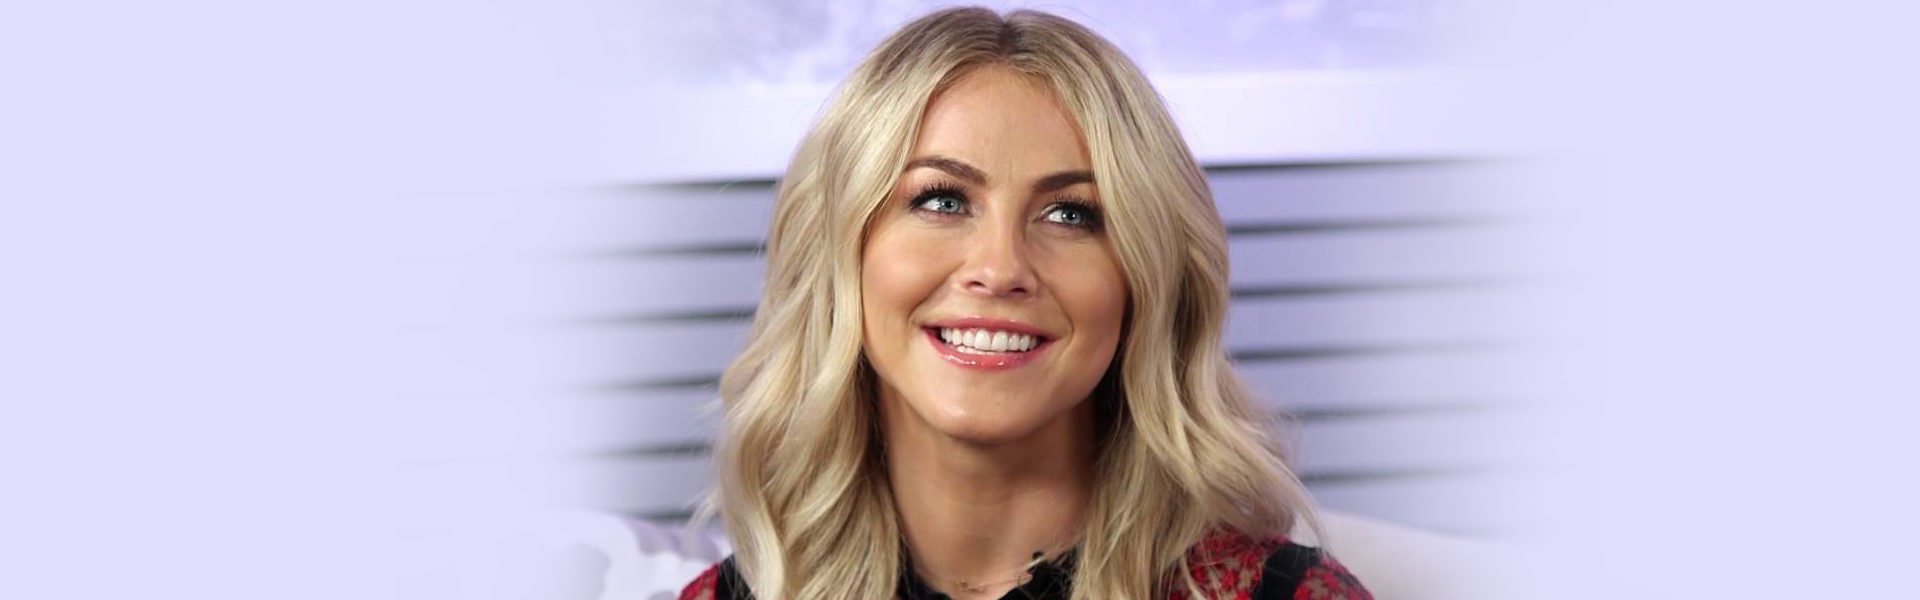 Julianne Hough Shares a Video – and a Song – After Wisdom Teeth Come Out